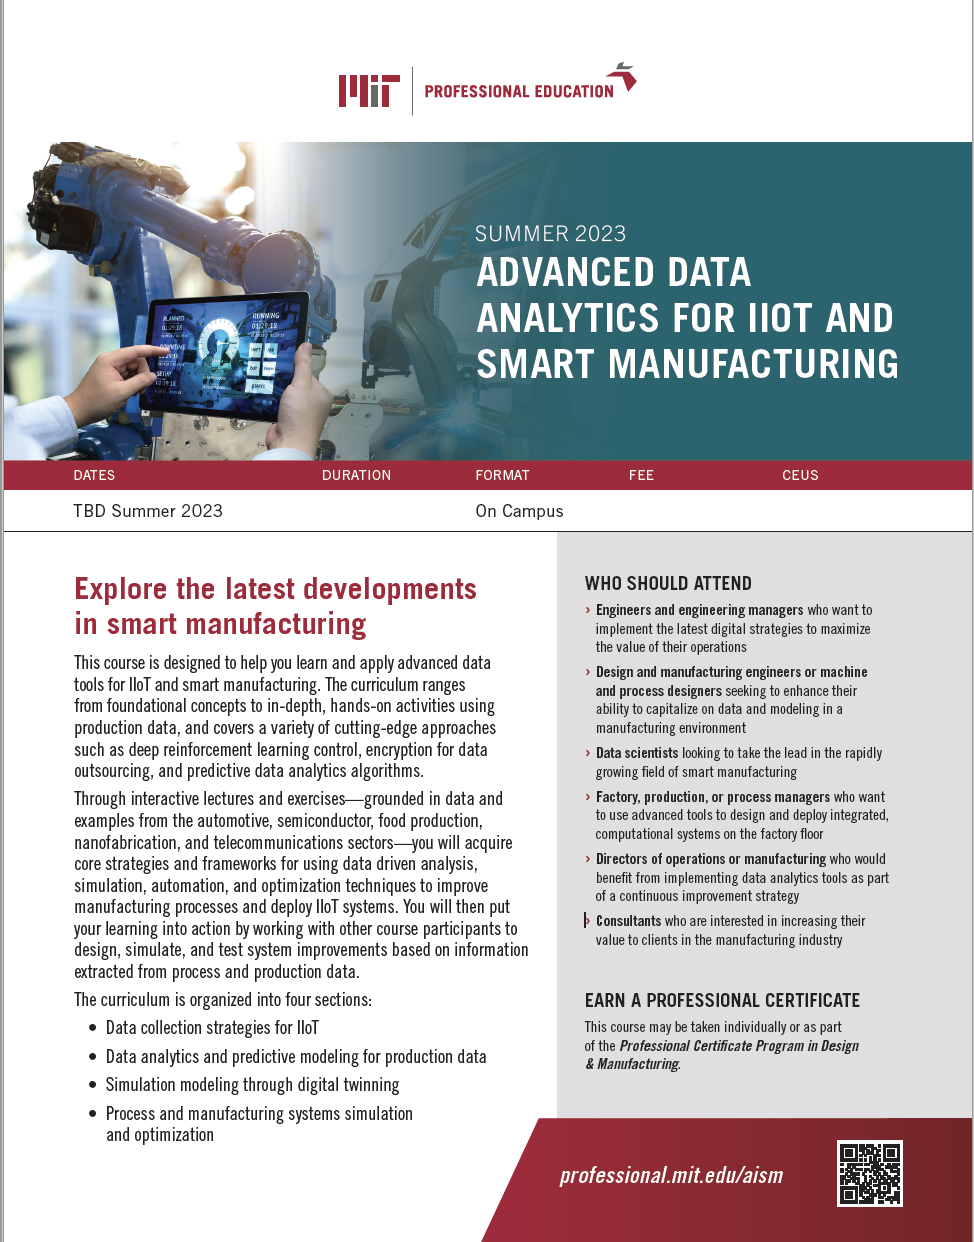 Advanced Data Analytics For IIOT and Smart Manufacturing - Brochure Image